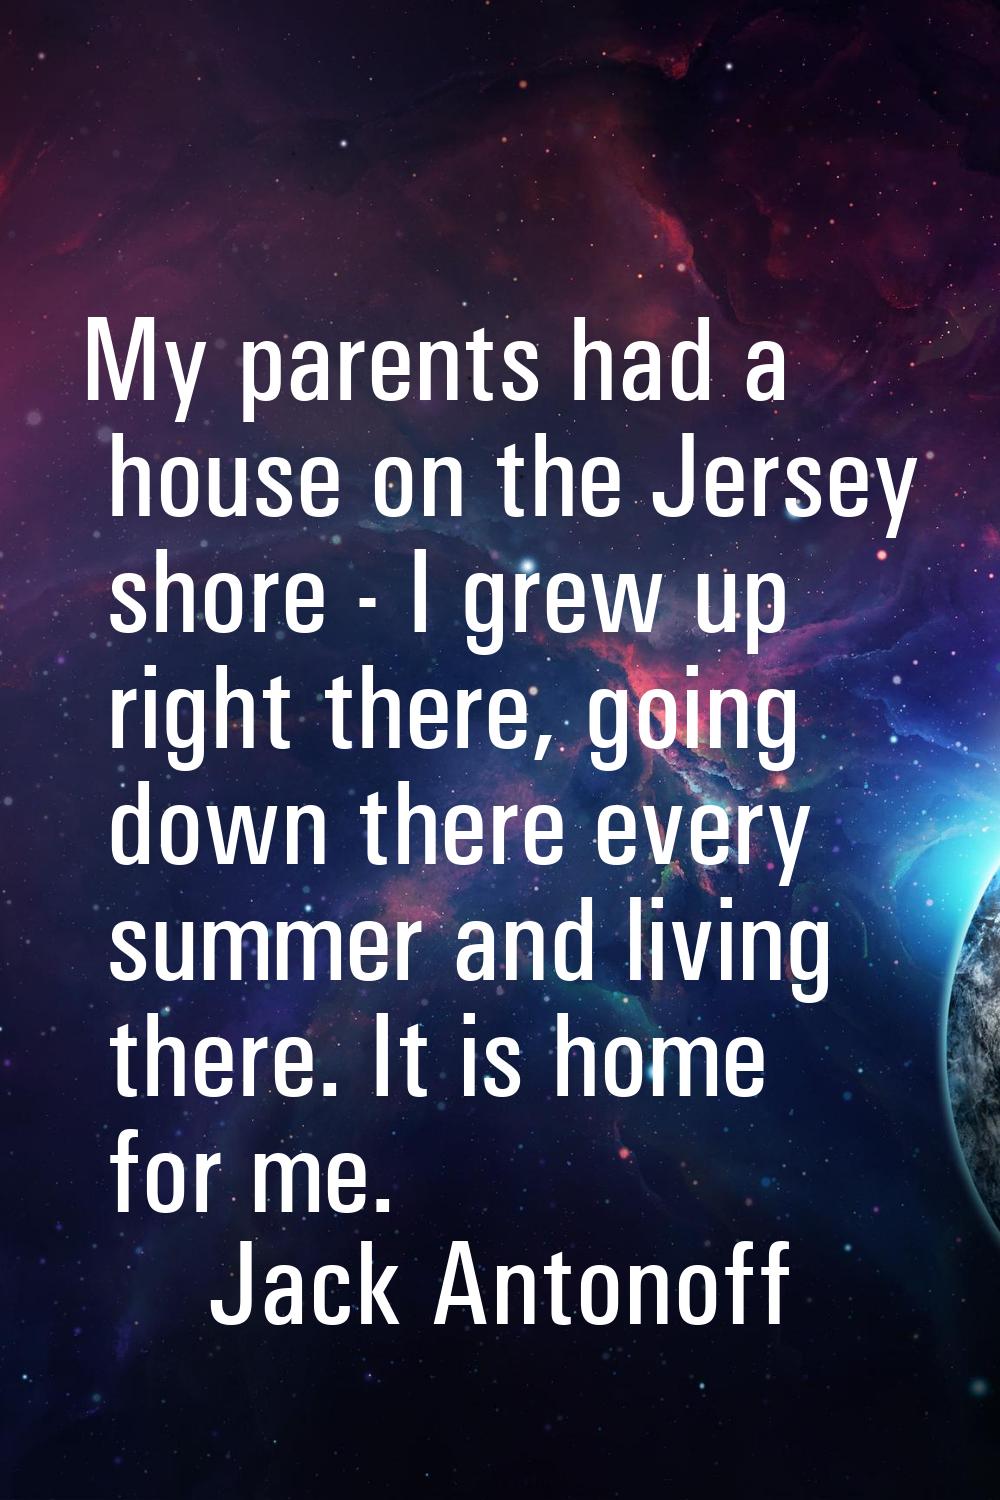 My parents had a house on the Jersey shore - I grew up right there, going down there every summer a